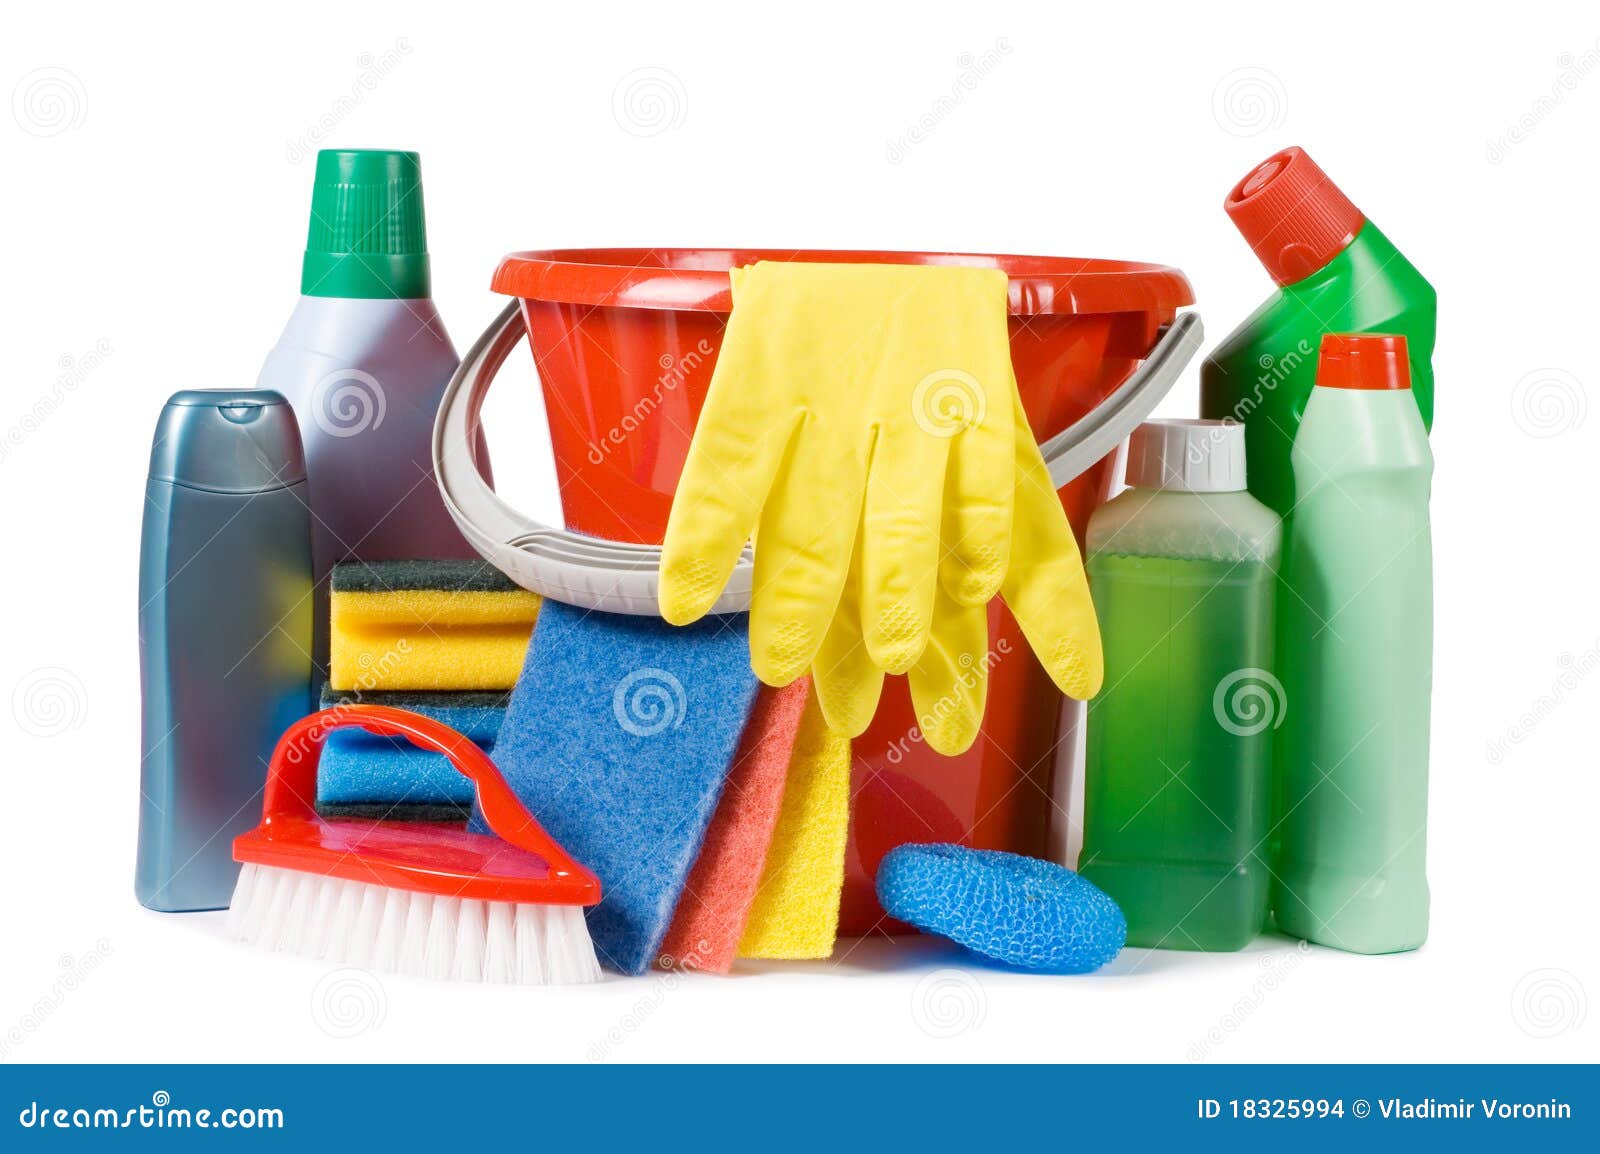 assortment of means for cleaning